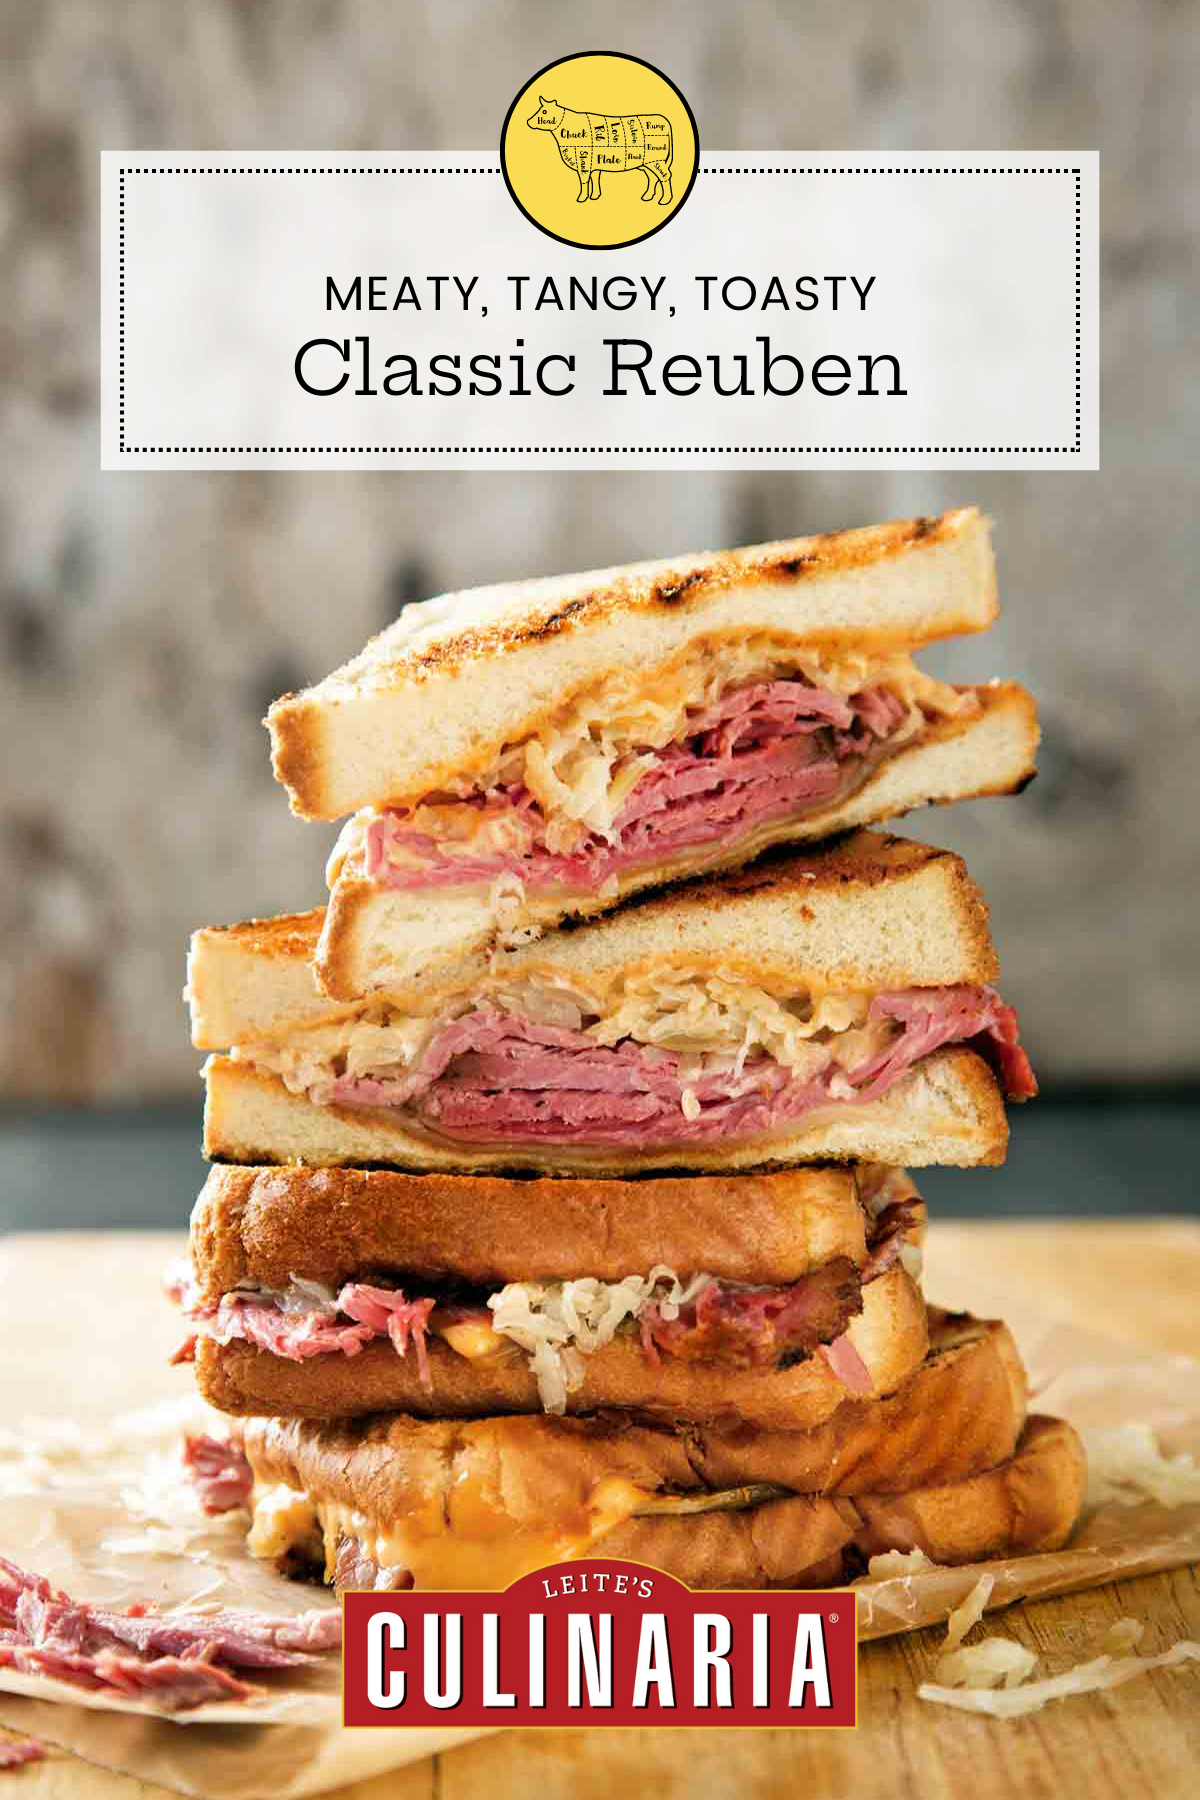 A stack of halved reuben sandwiches on a wooden cutting board.